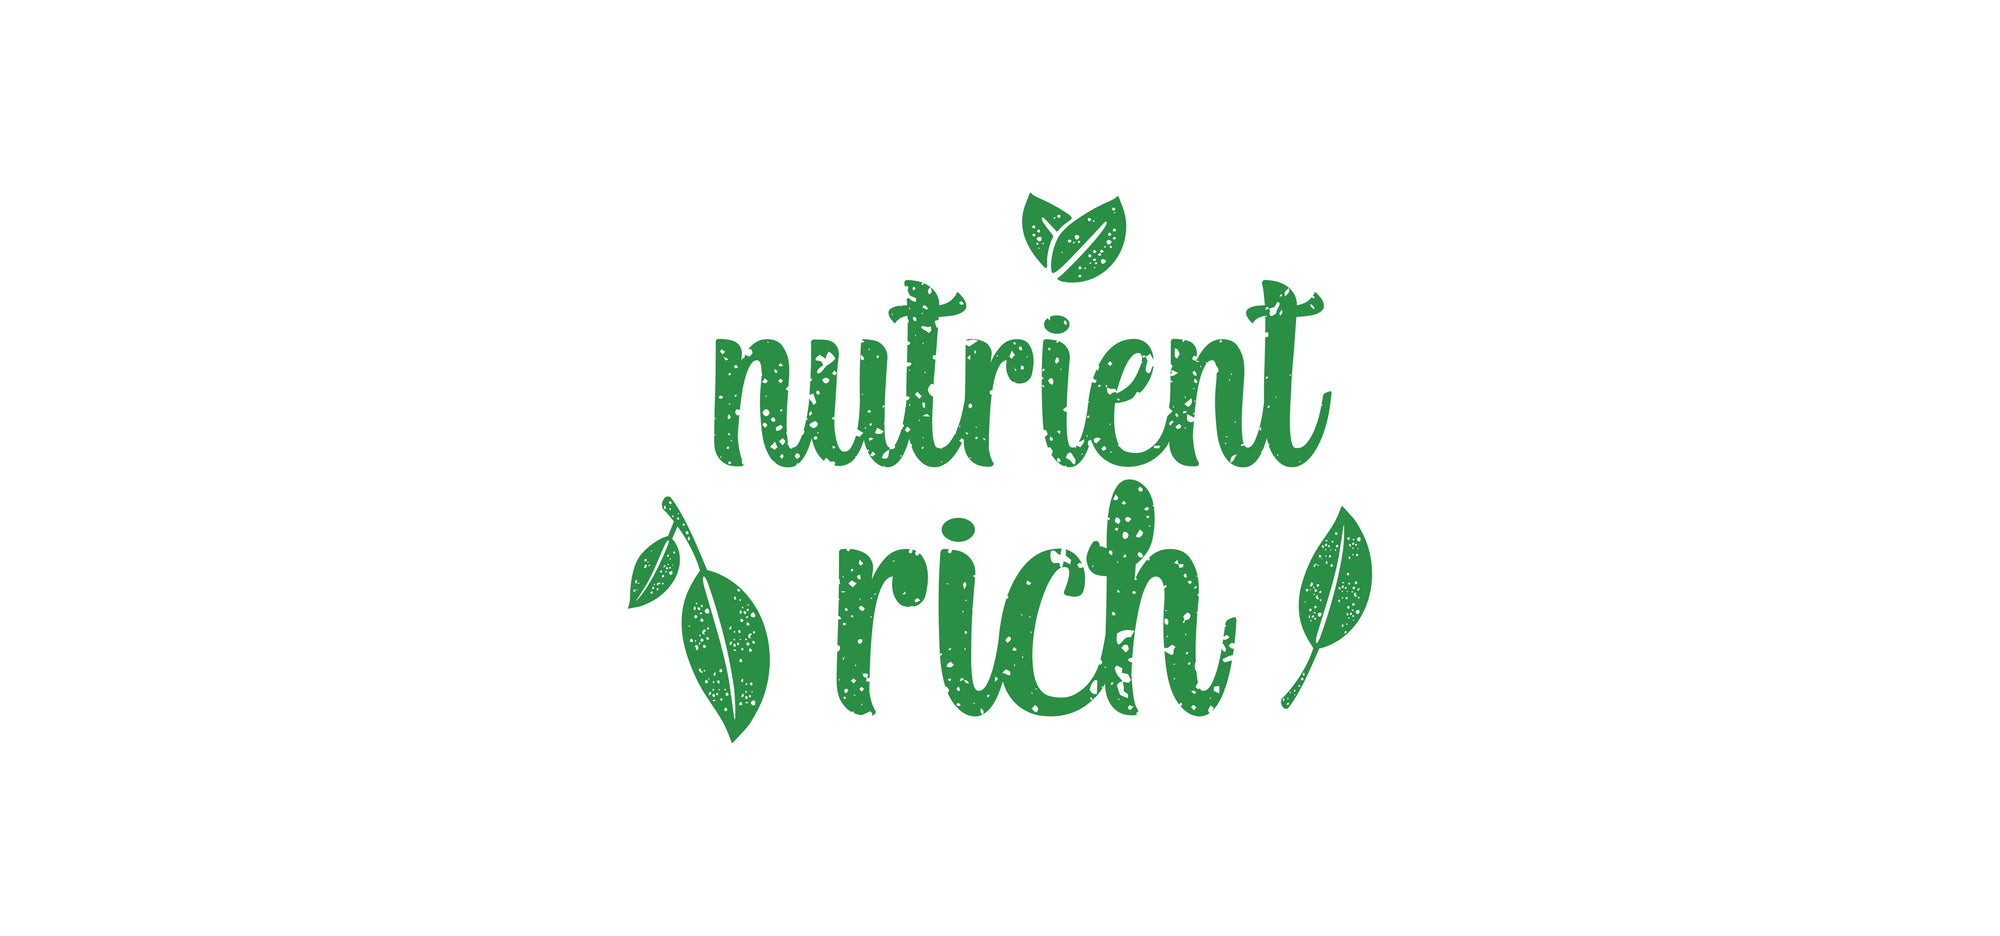 We aim to provide plant-based nutrition to families through nutrient-rich greens to help elevate disease prevention.